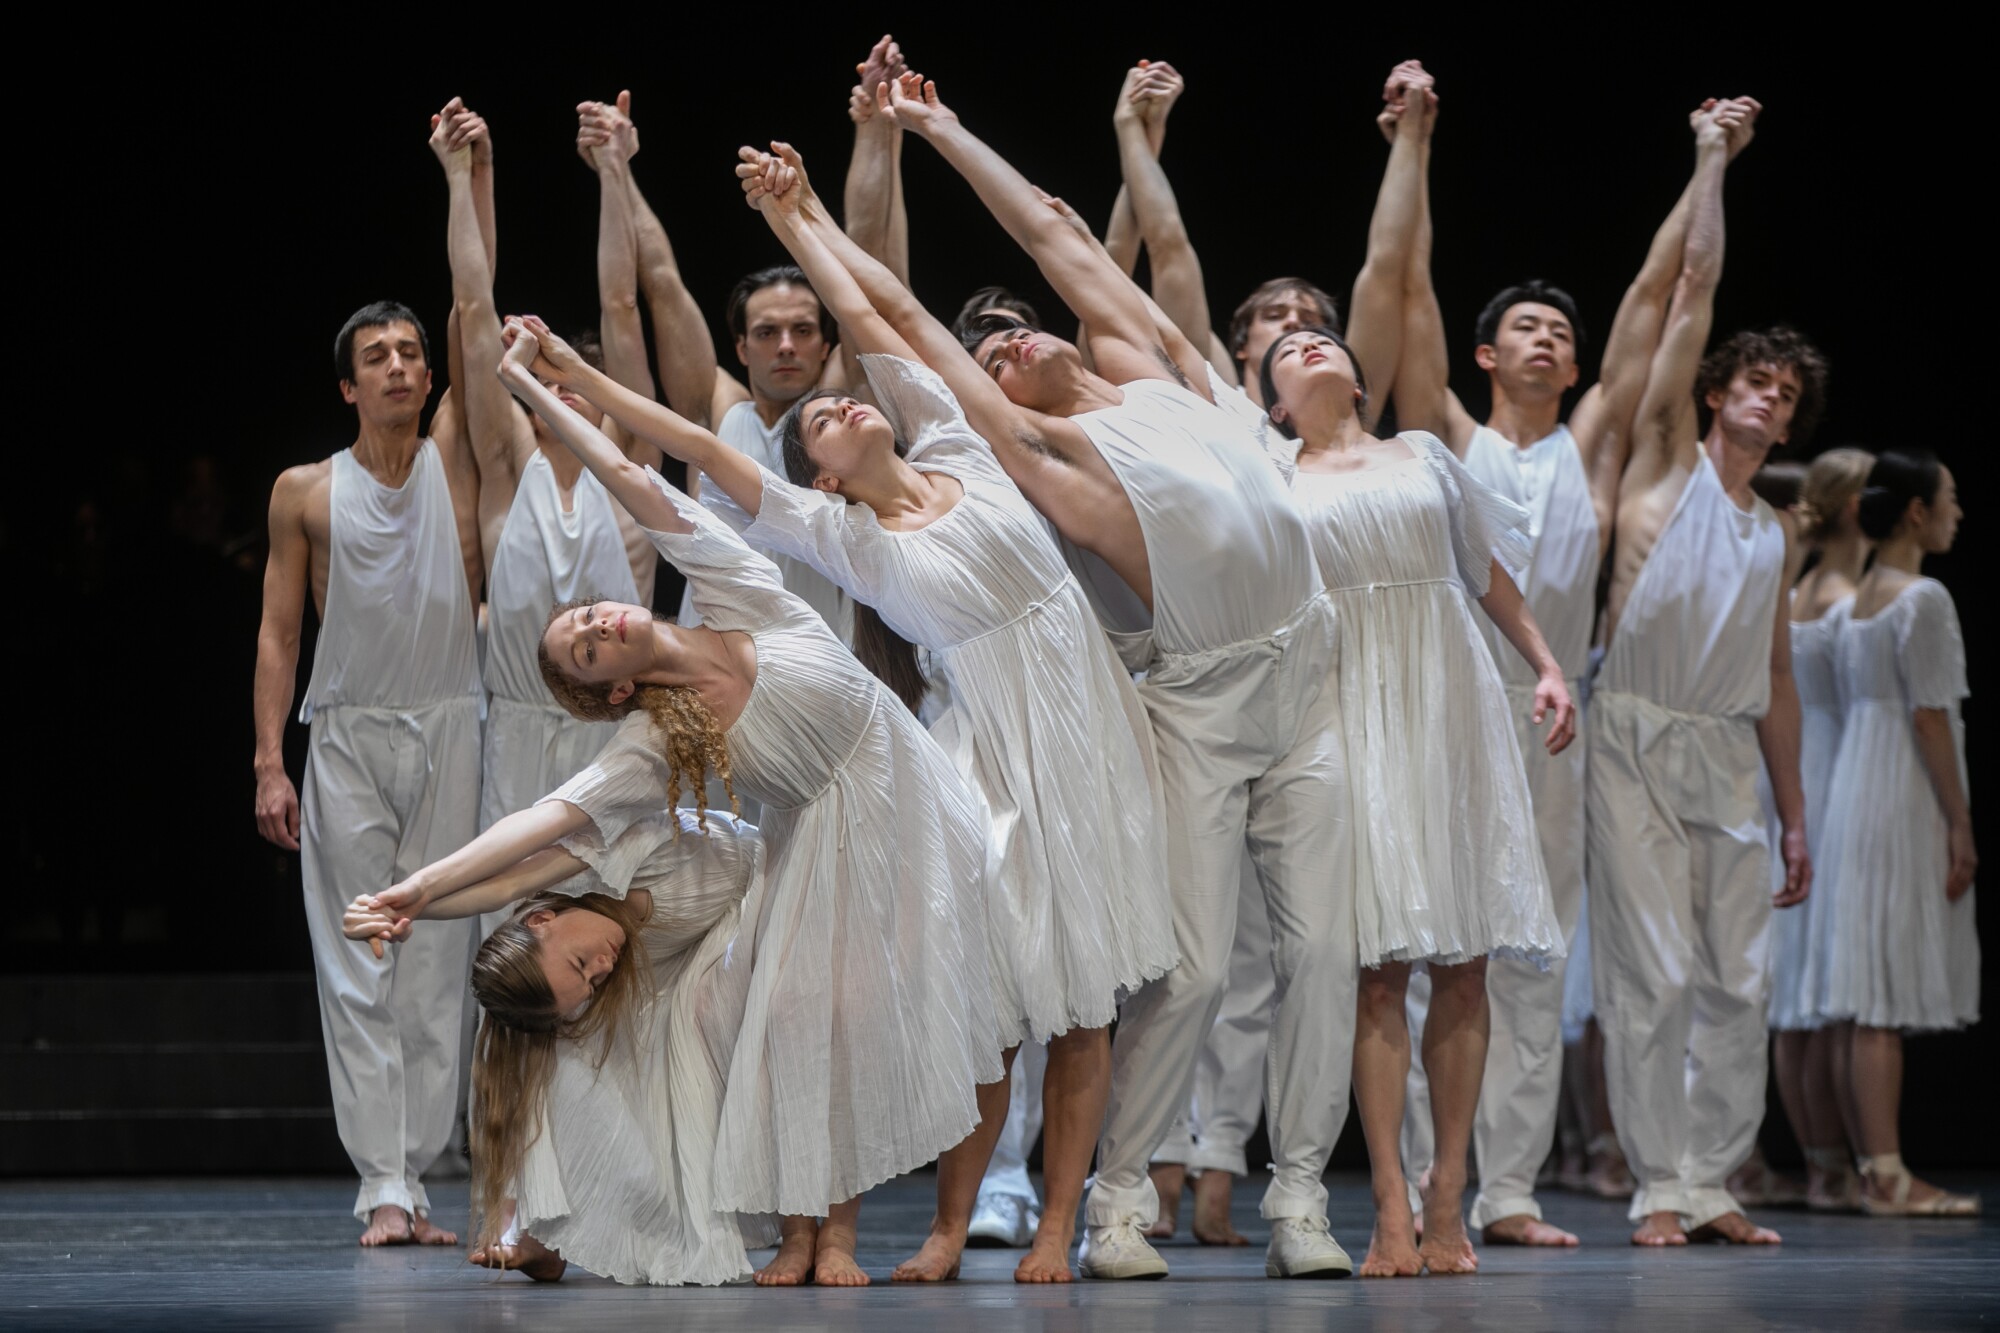 Dancers with raised arms and clasped hands form a rippling pattern.